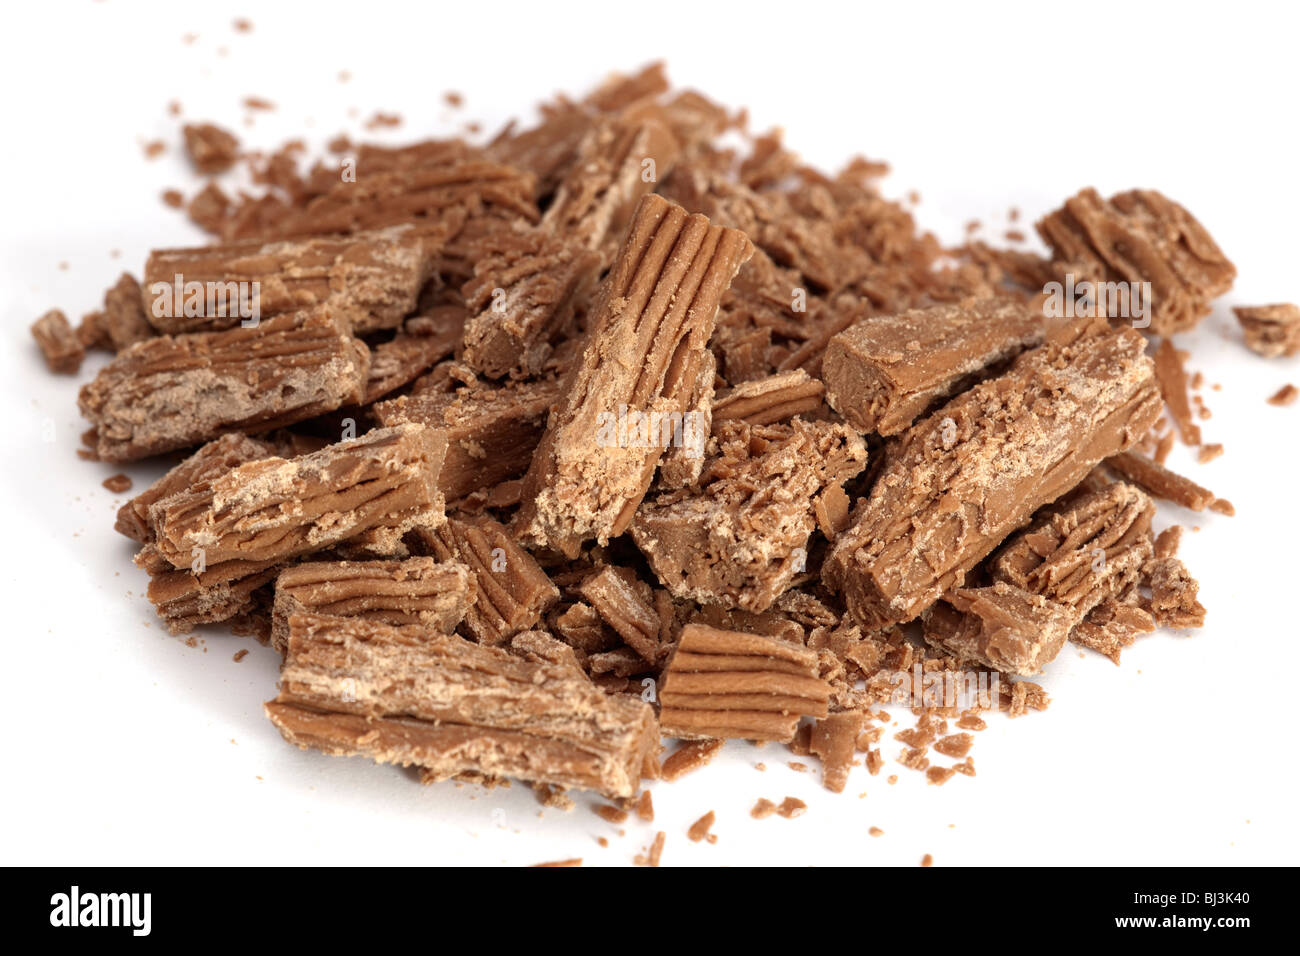 Pile of crumbled flaky chocolate Stock Photo